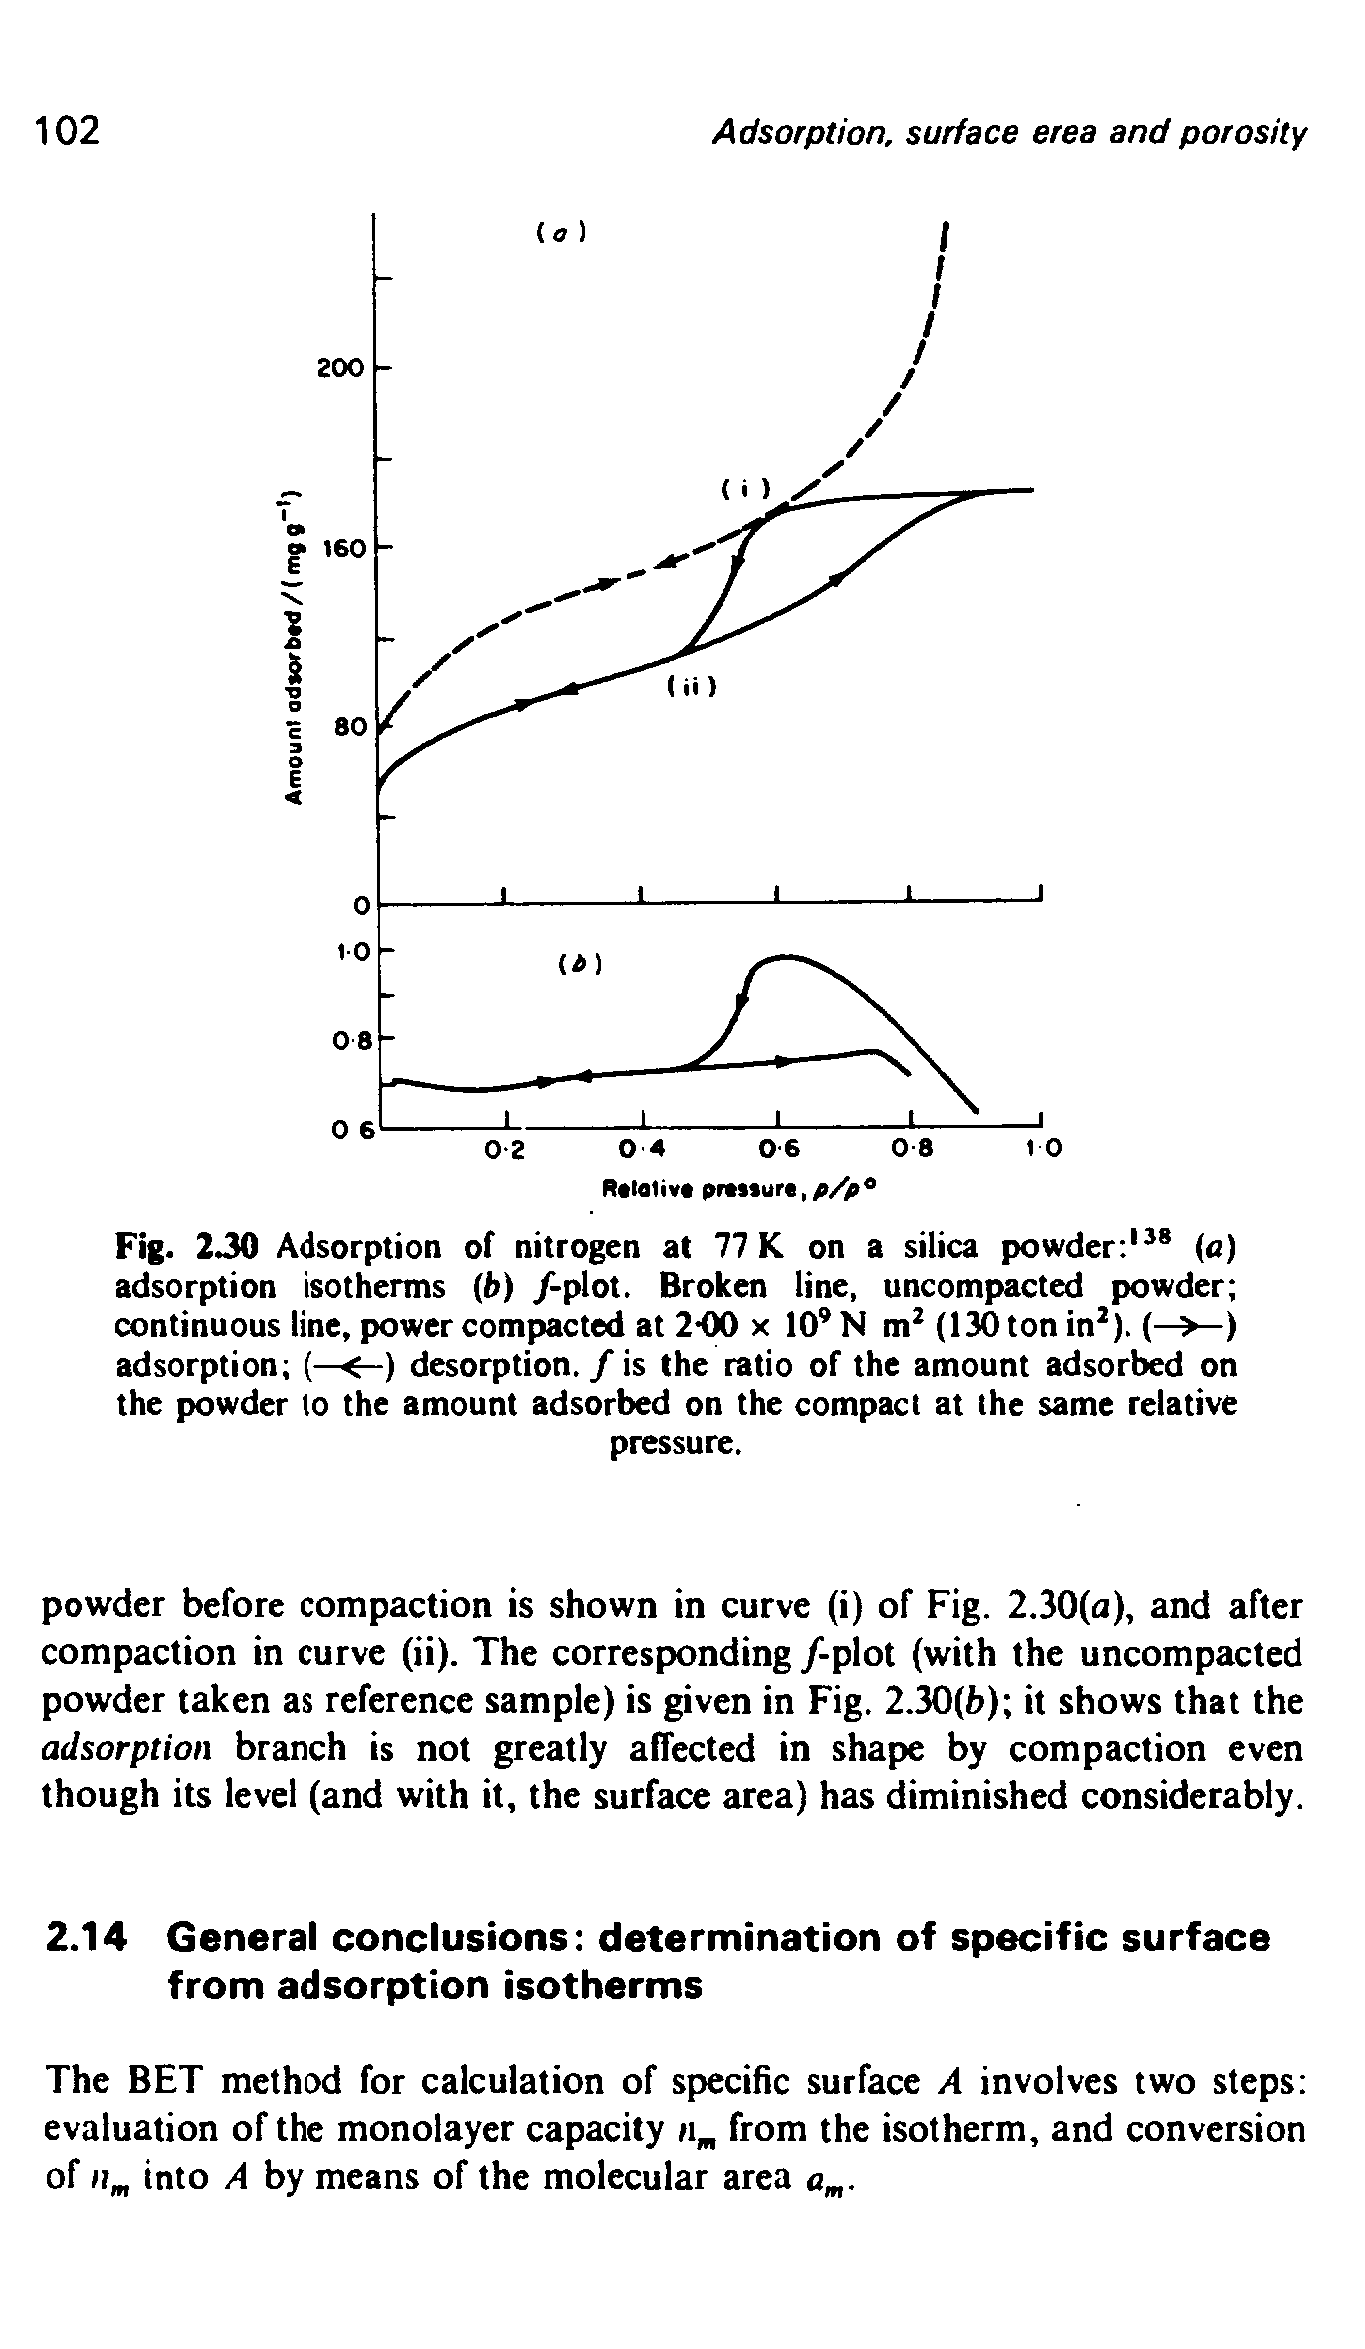 Fig. 230 Adsorption of nitrogen at 77 K on a silica powder a) adsorption isotherms b) /-plot. Broken line, uncompacted powder continuous line, power compacted at 2-00 x 10 N m (130 ton in ). (—>—) adsorption (—<-) desorption. / is the ratio of the amount adsorbed on the powder to the amount adsorbed on the compact at the same relative...